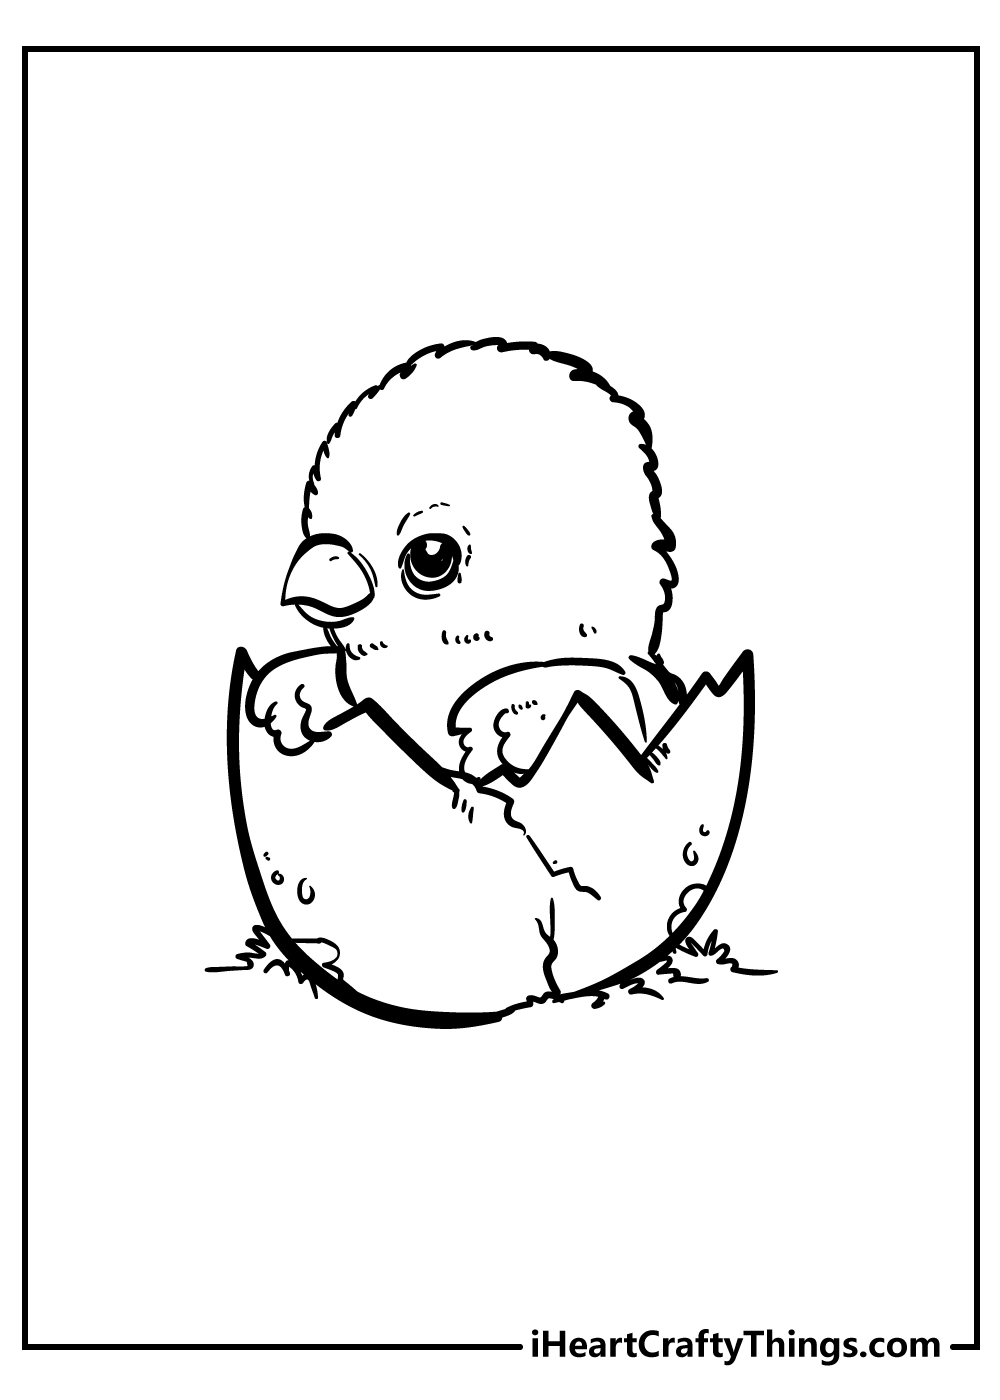 lettle Chicken Coloring Pages free download